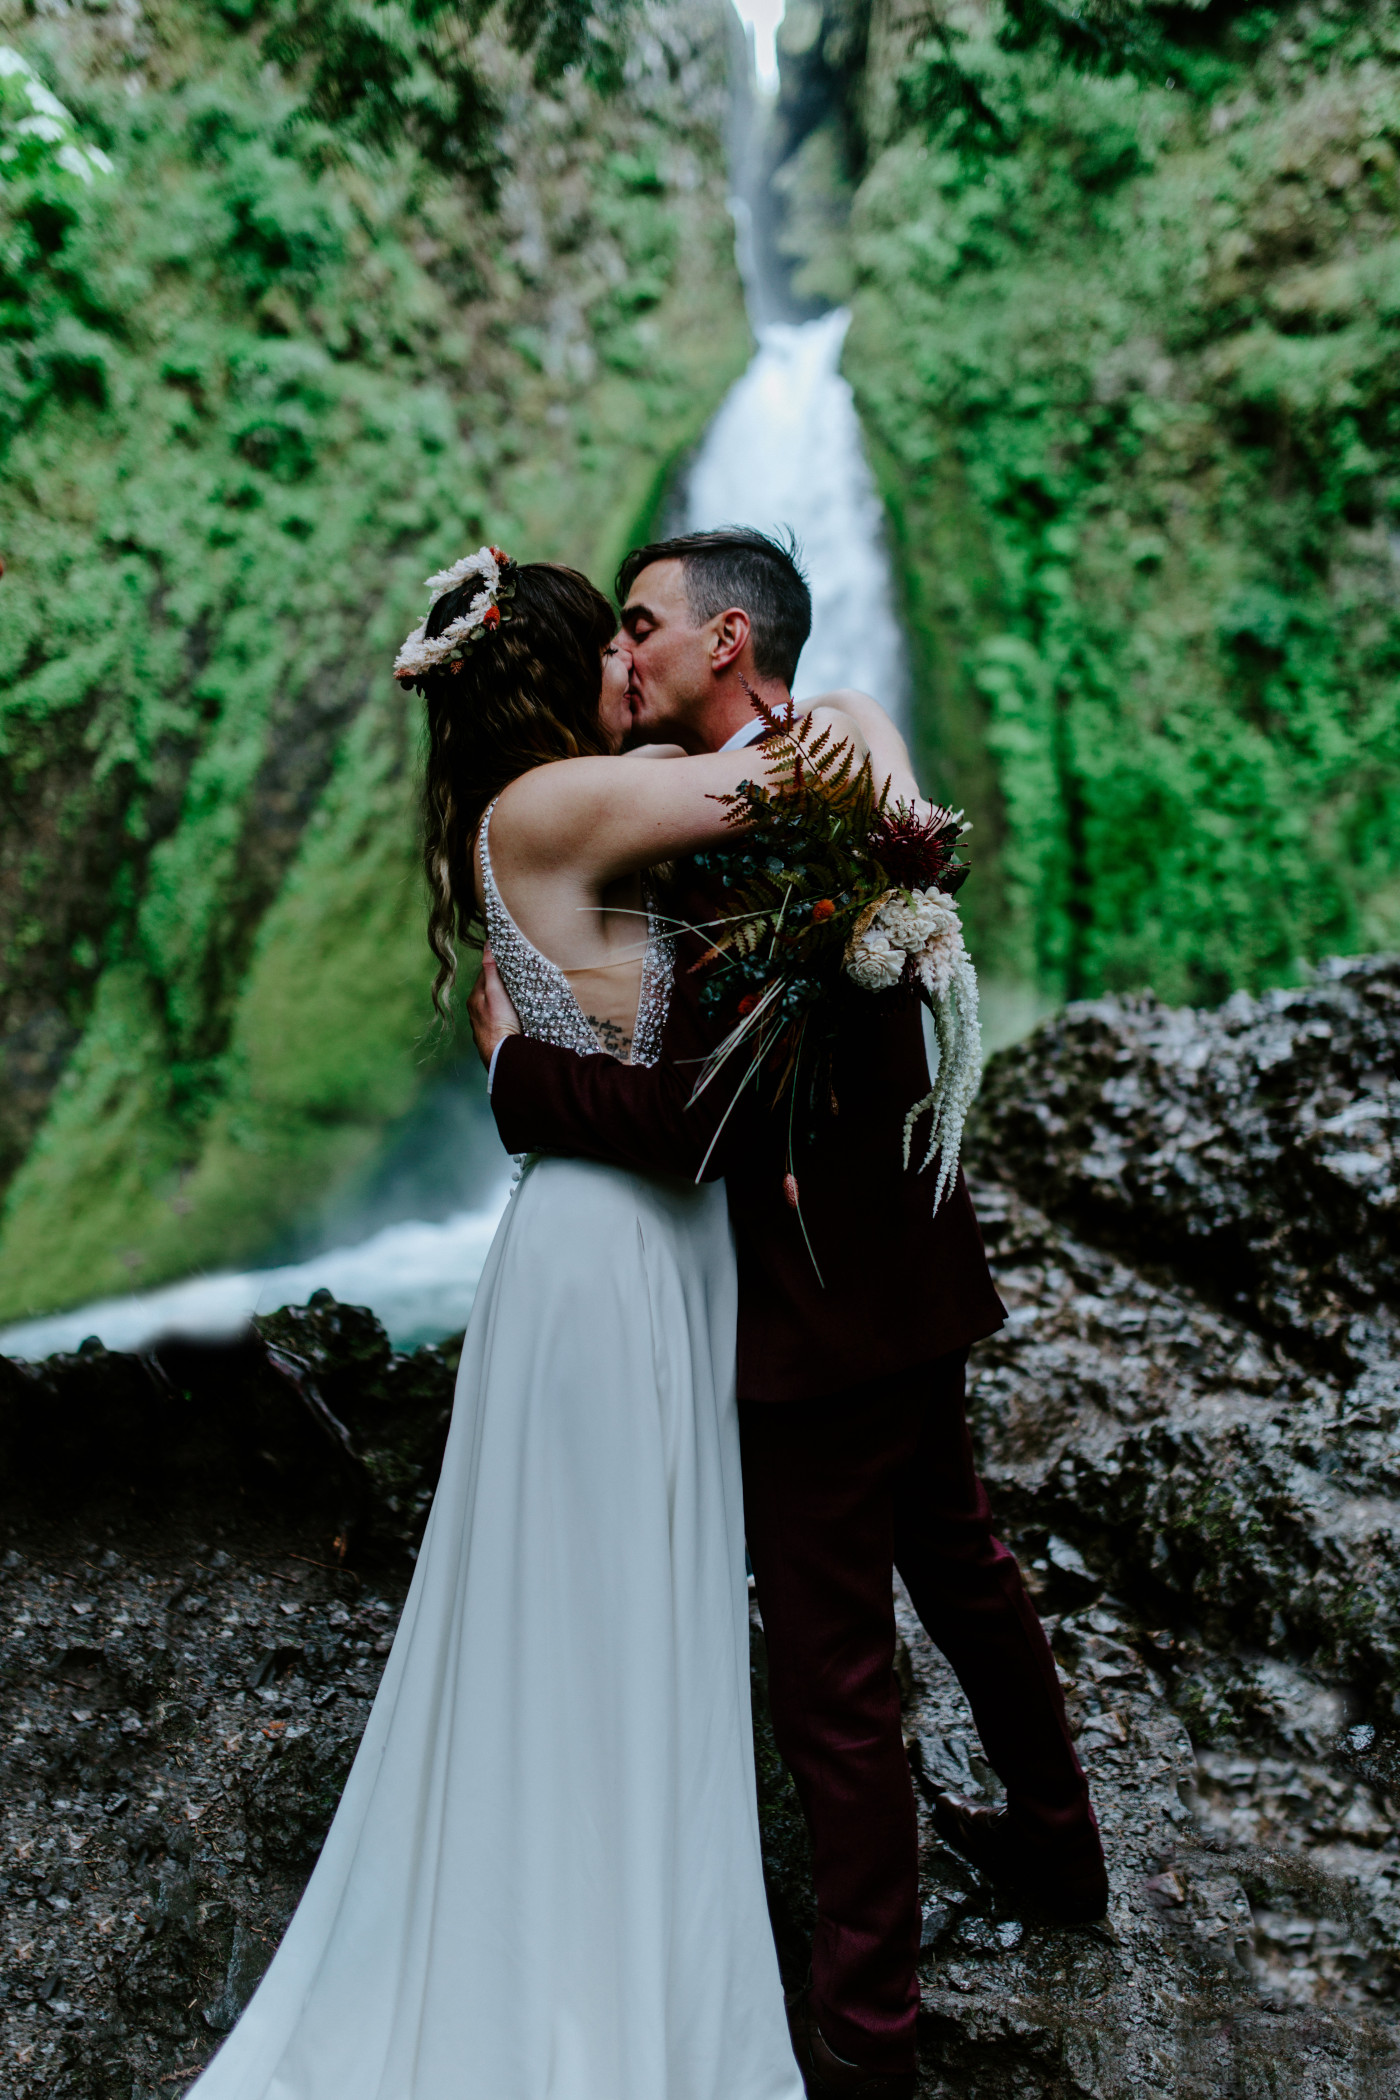 Jordan and Andrew kiss in front of Wahcella Falls.